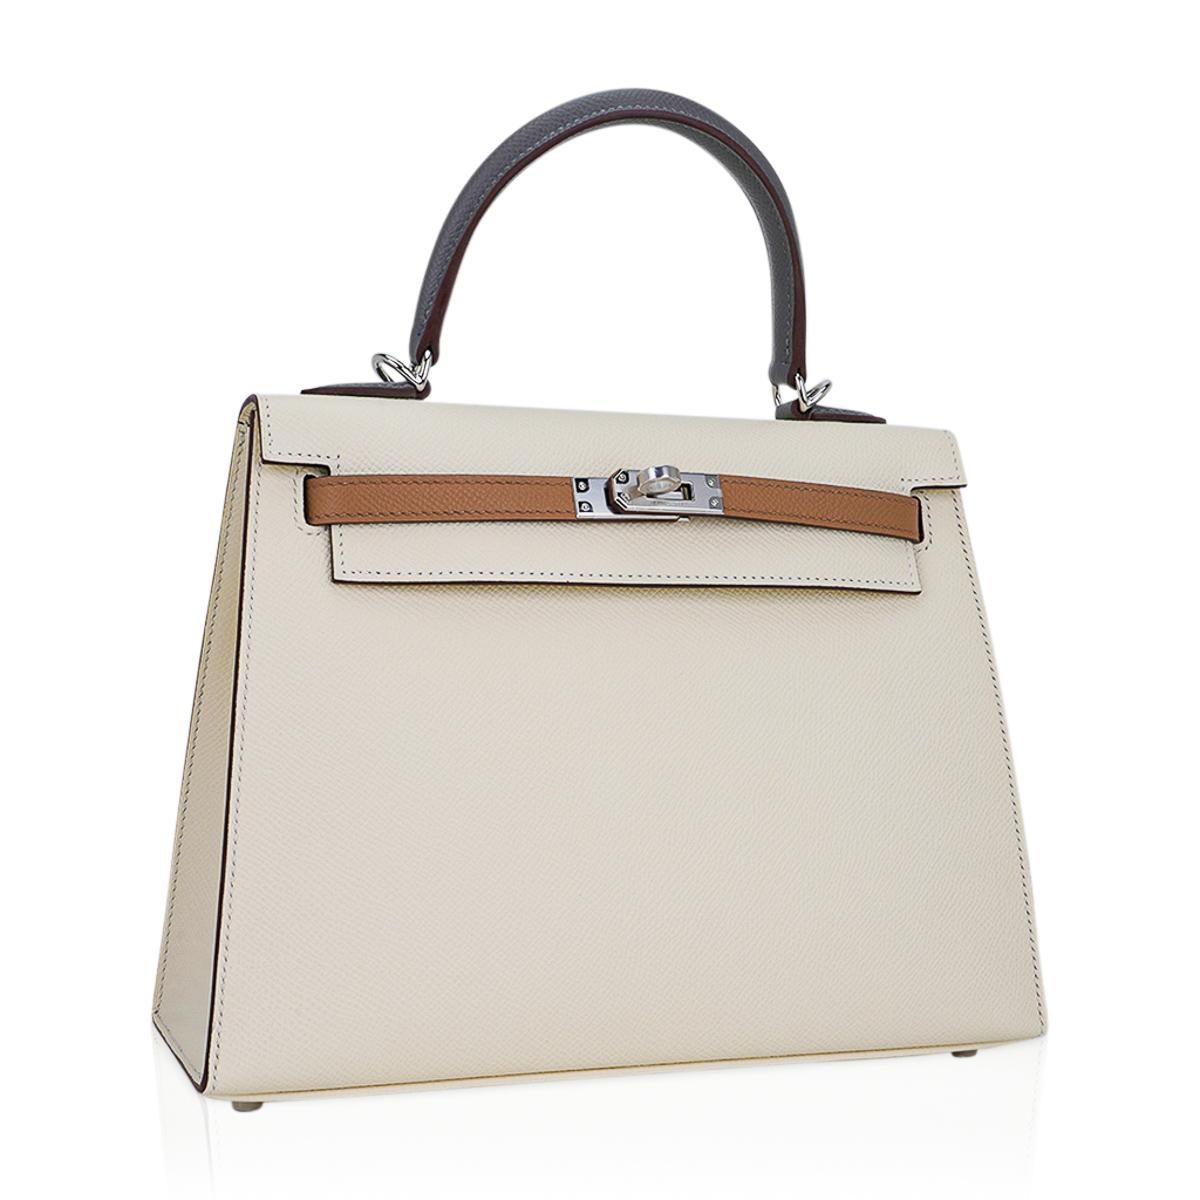 Mightychic offers an Hermes Kelly 25 bag featured in Nata, Chai and Gris Meyer.
A stunning combination of neutral hues to compliment a wide variety of your wardrobe.
The body is Nata with the straps in Chai and the top handle and clochette in Gris